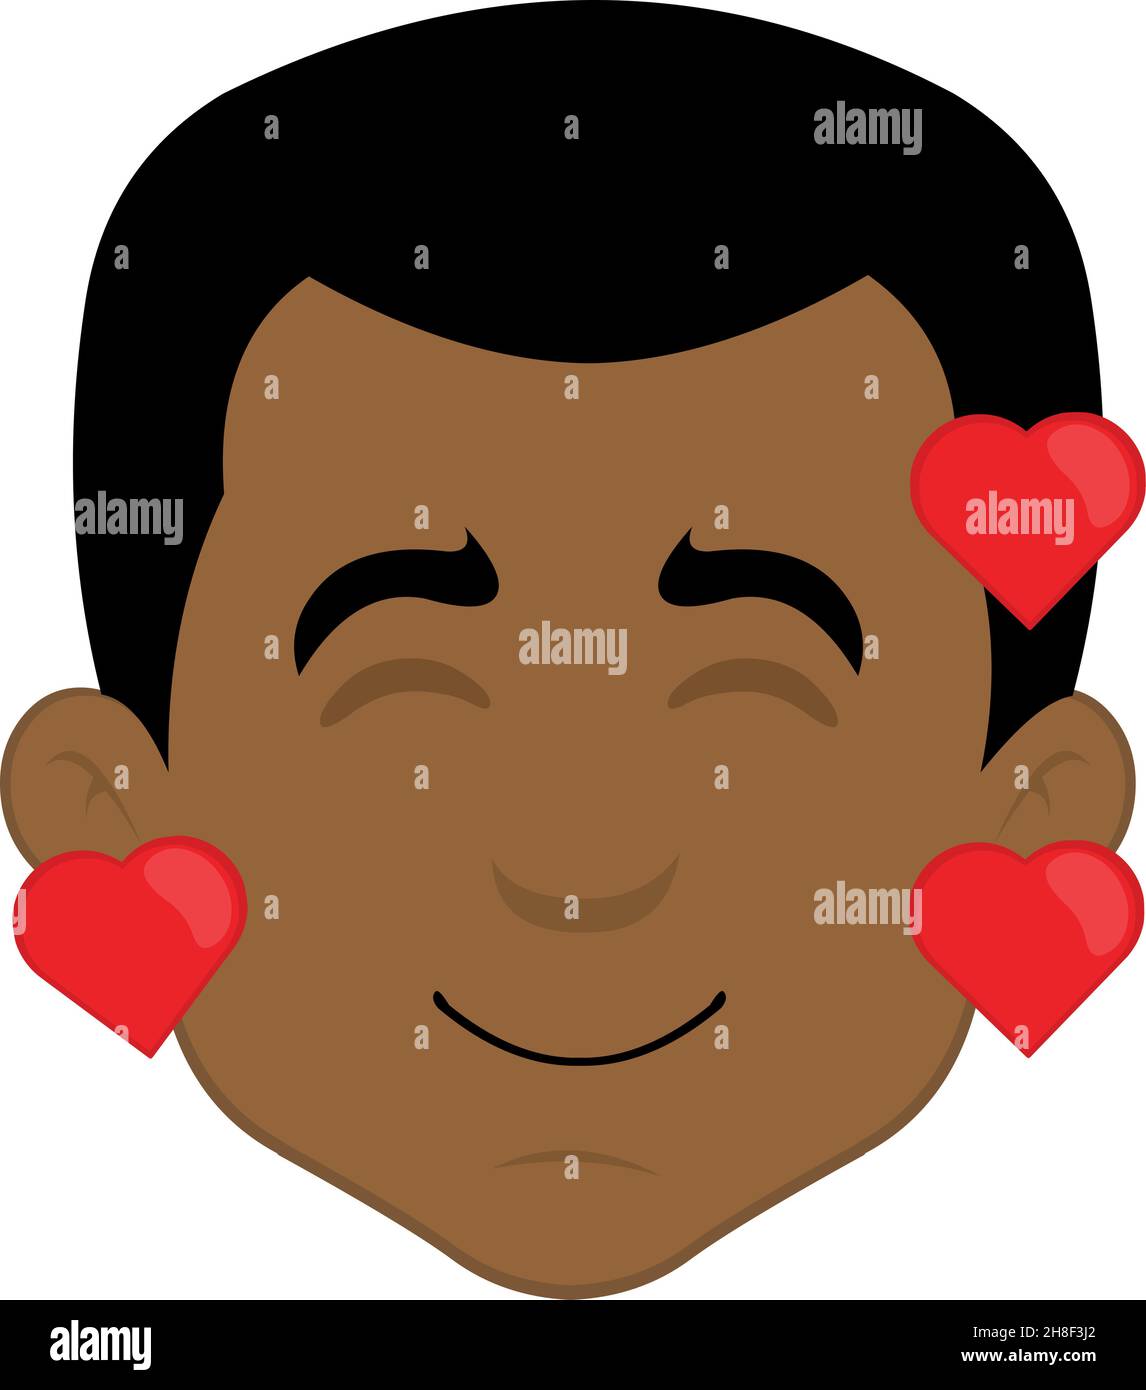 Vector illustration of a cartoon man's face surrounded by hearts Stock Vector